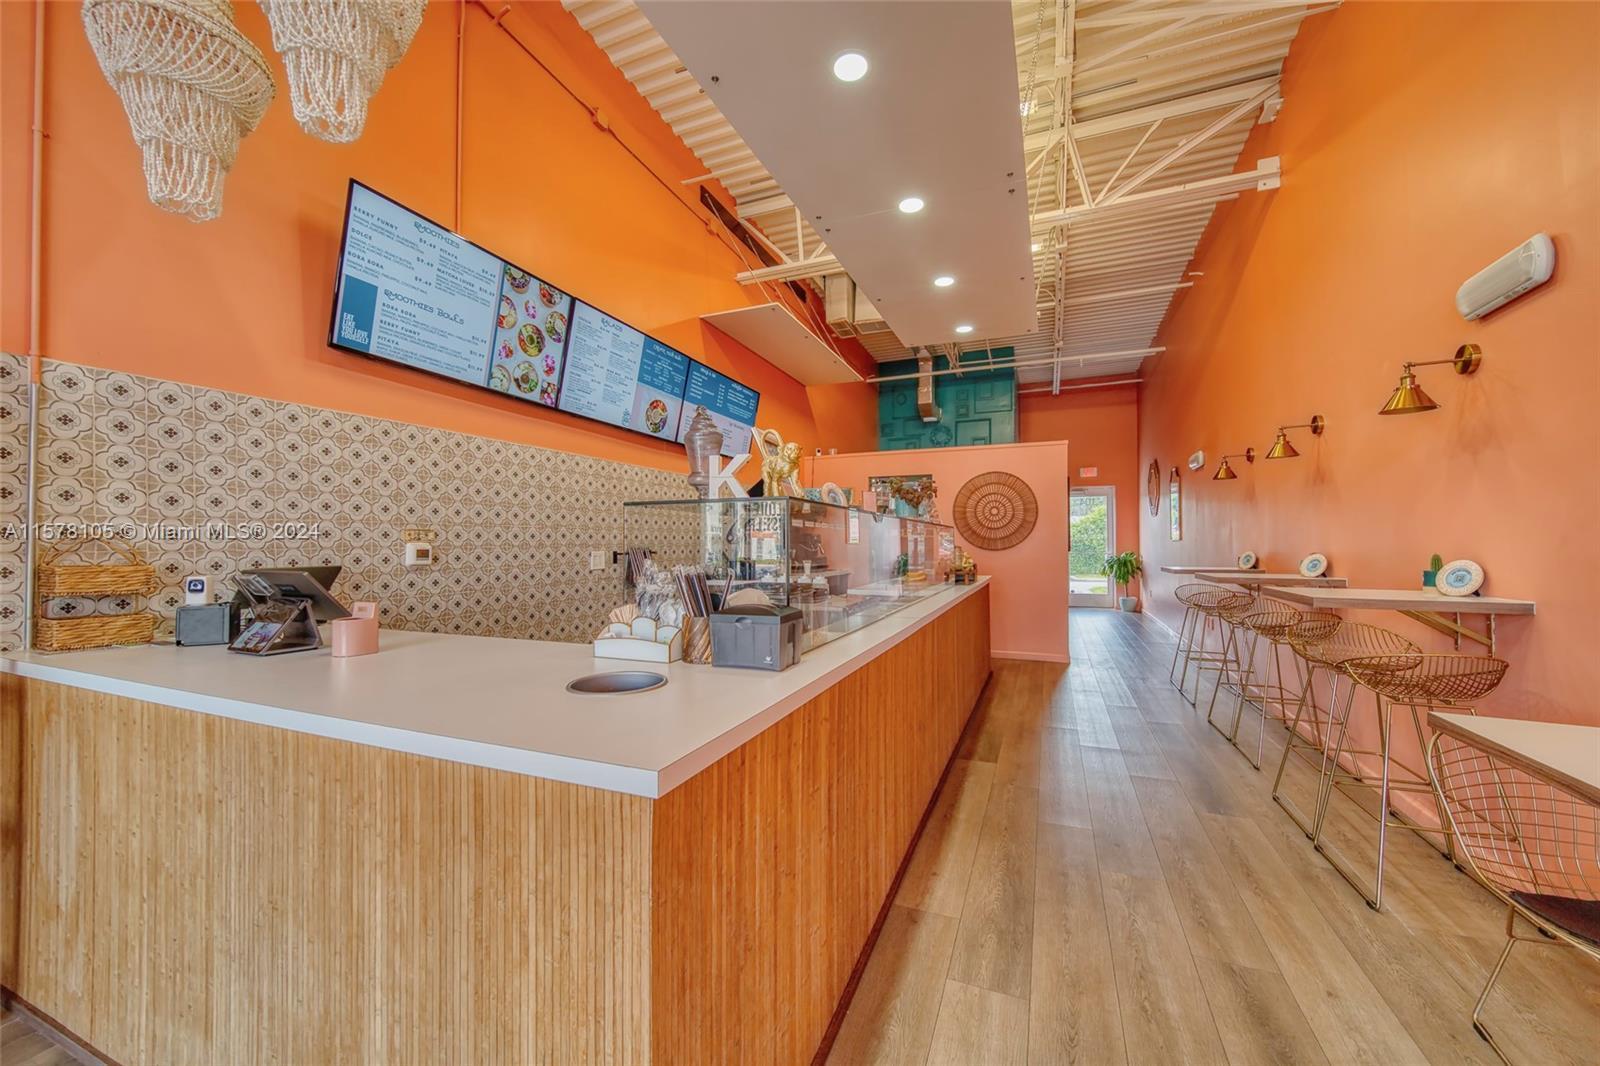 Photo of Healthy Cafe For Sale In Cooper City in Cooper City, FL